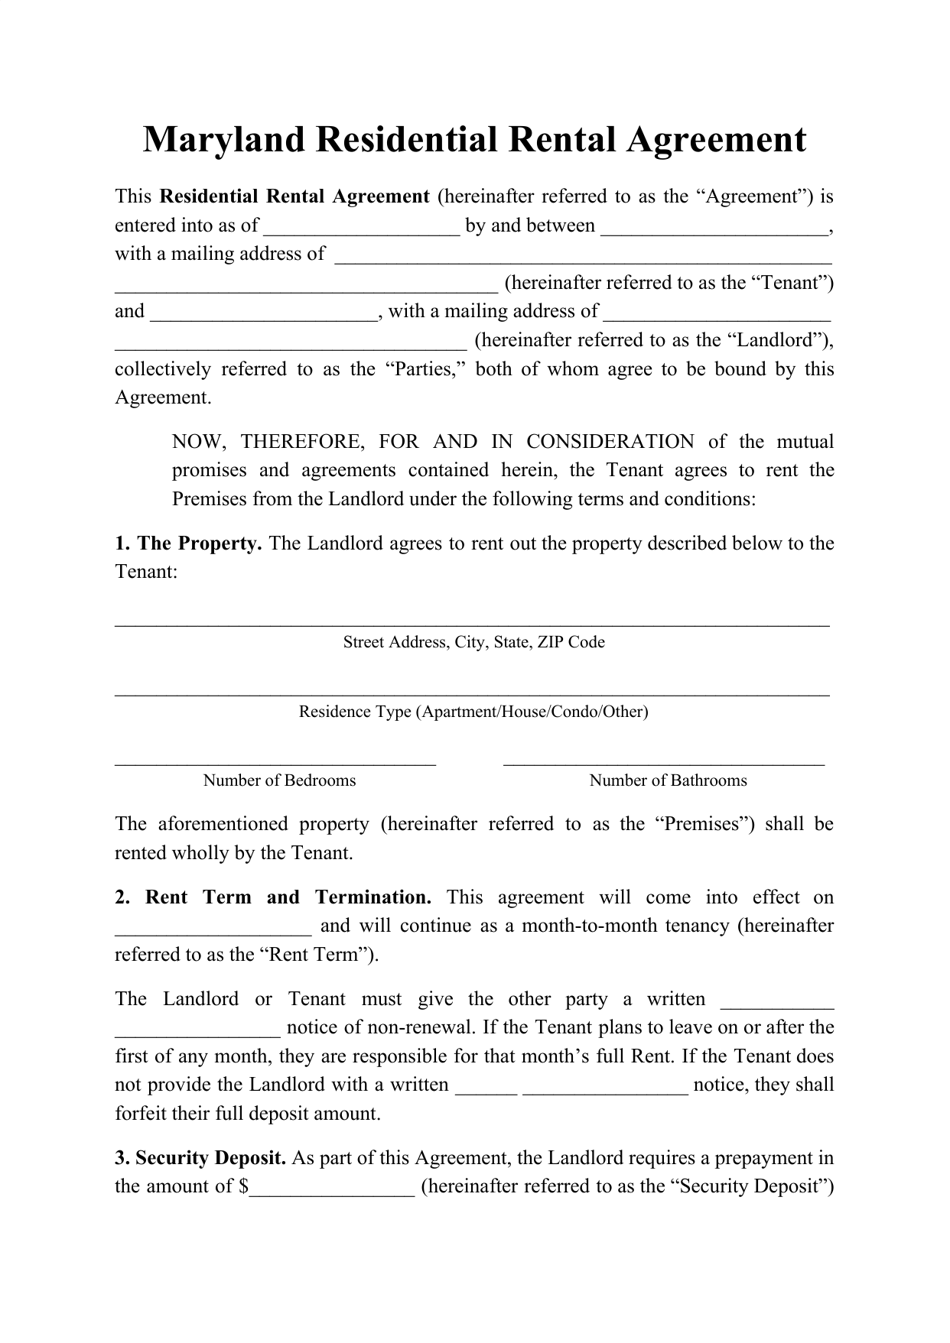 Residential Rental Agreement Template - Maryland, Page 1